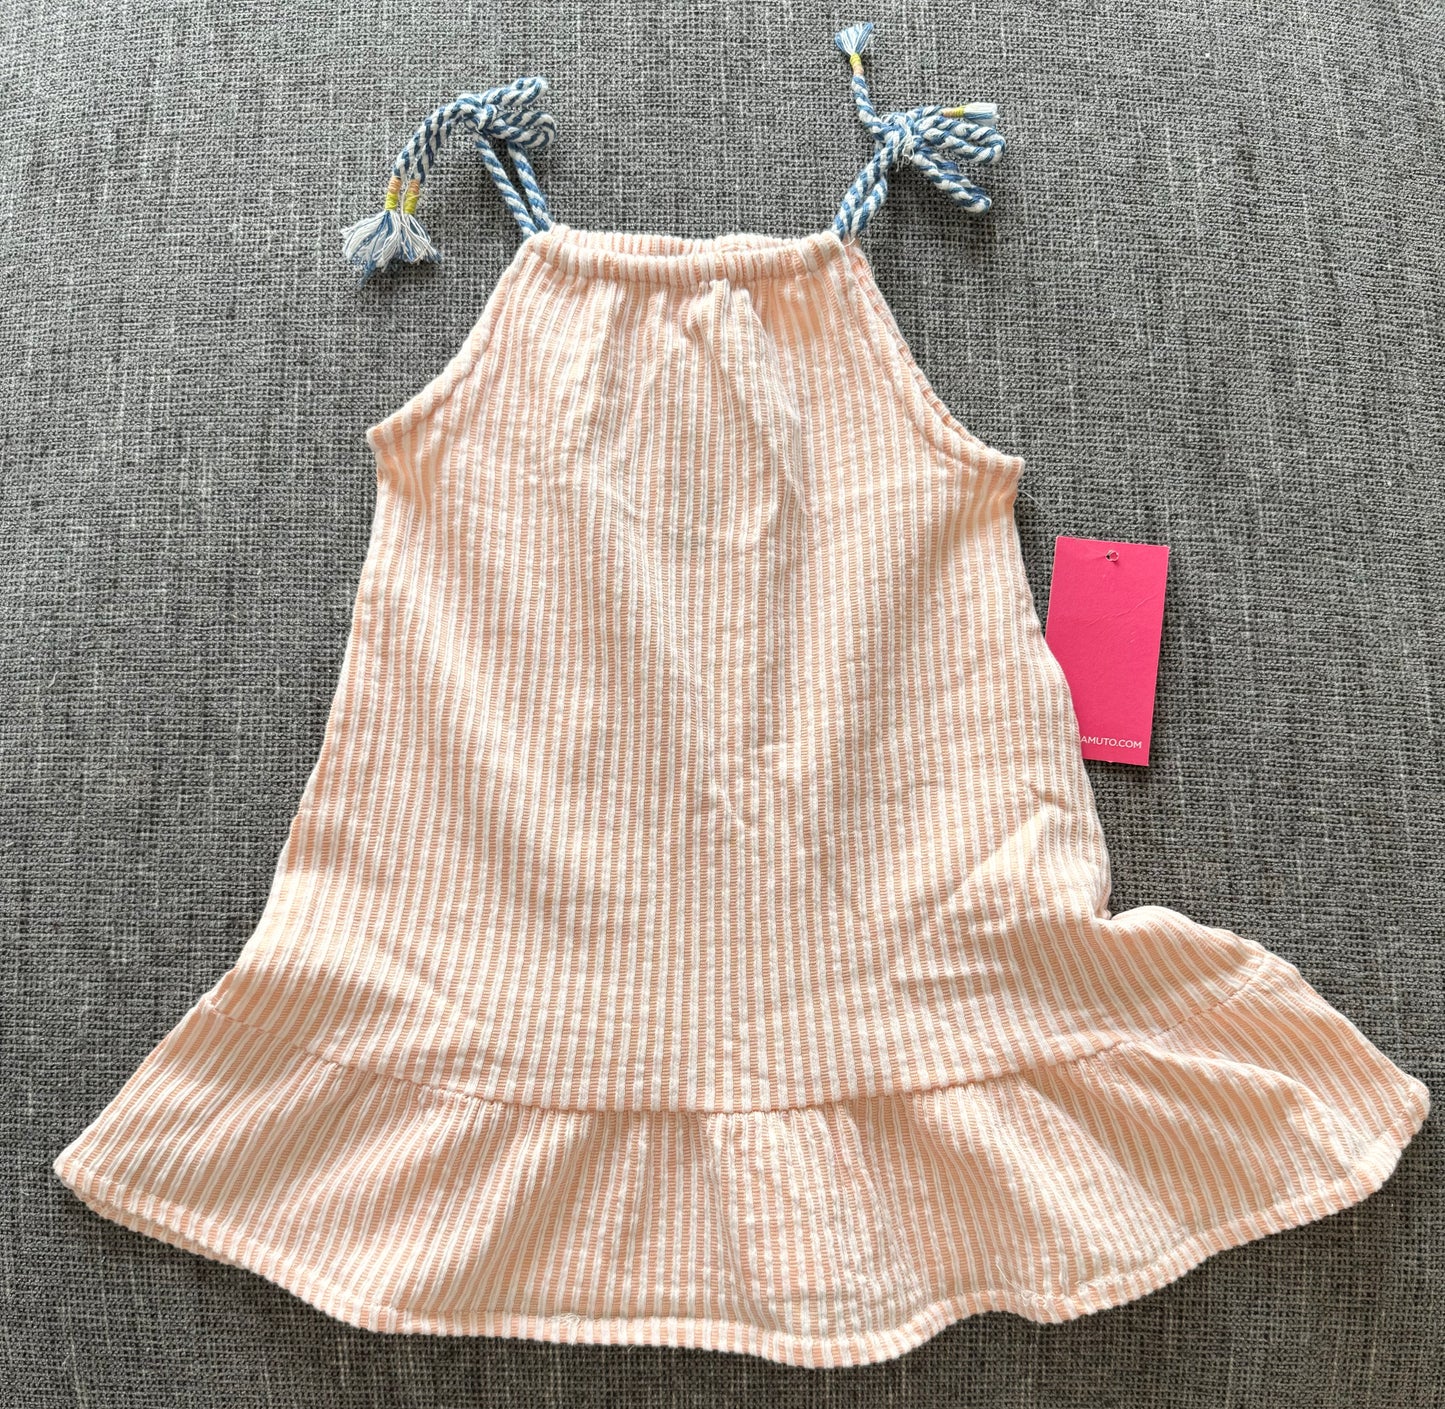 Vince Camuto Dress NWT - 3T